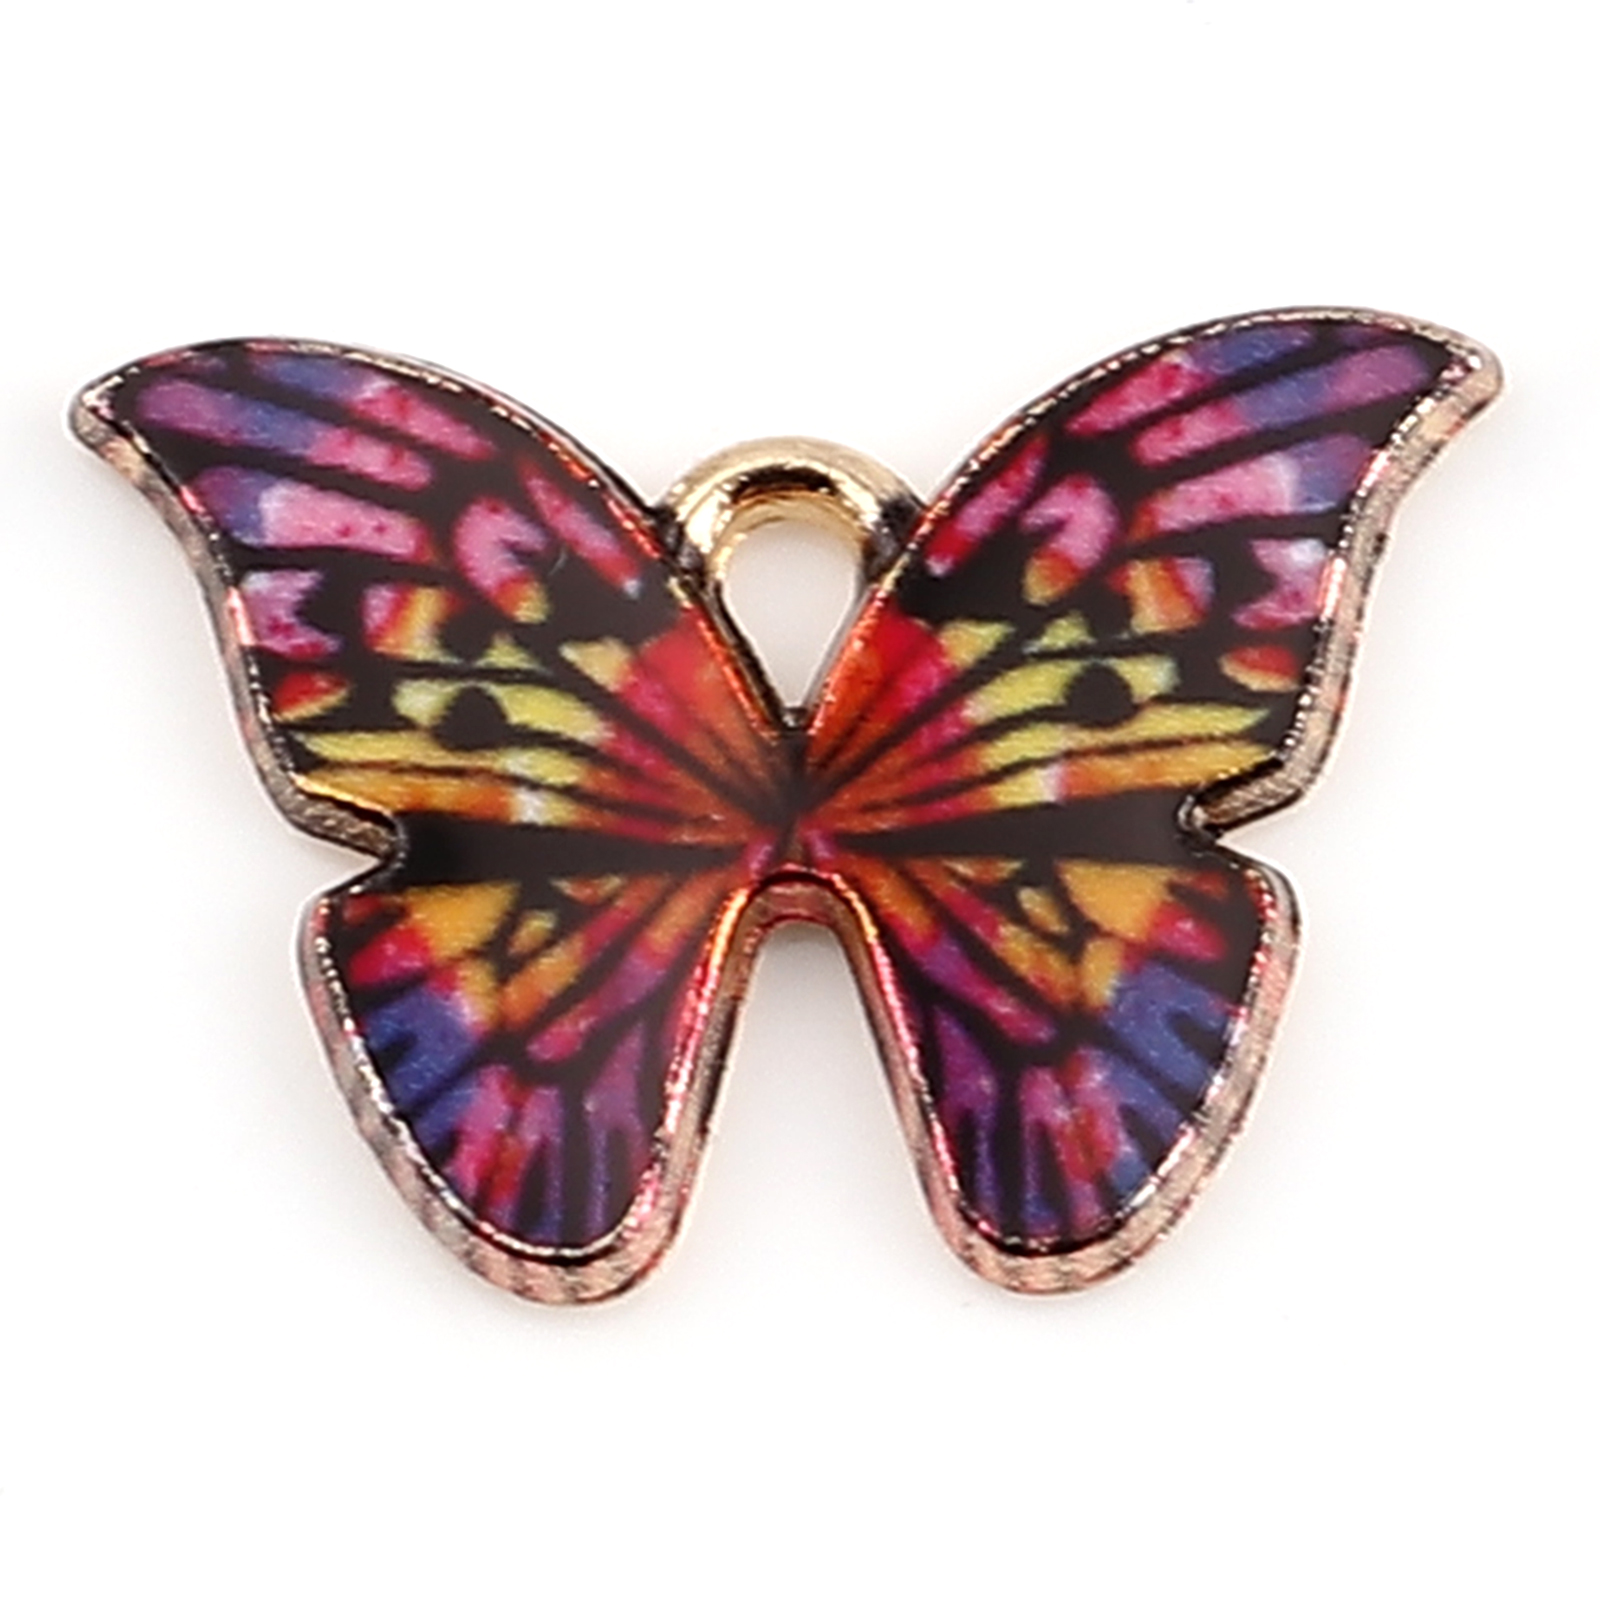 Picture of Zinc Based Alloy Insect Charms Butterfly Animal Gold Plated Multicolor Enamel 22mm x 15mm, 10 PCs